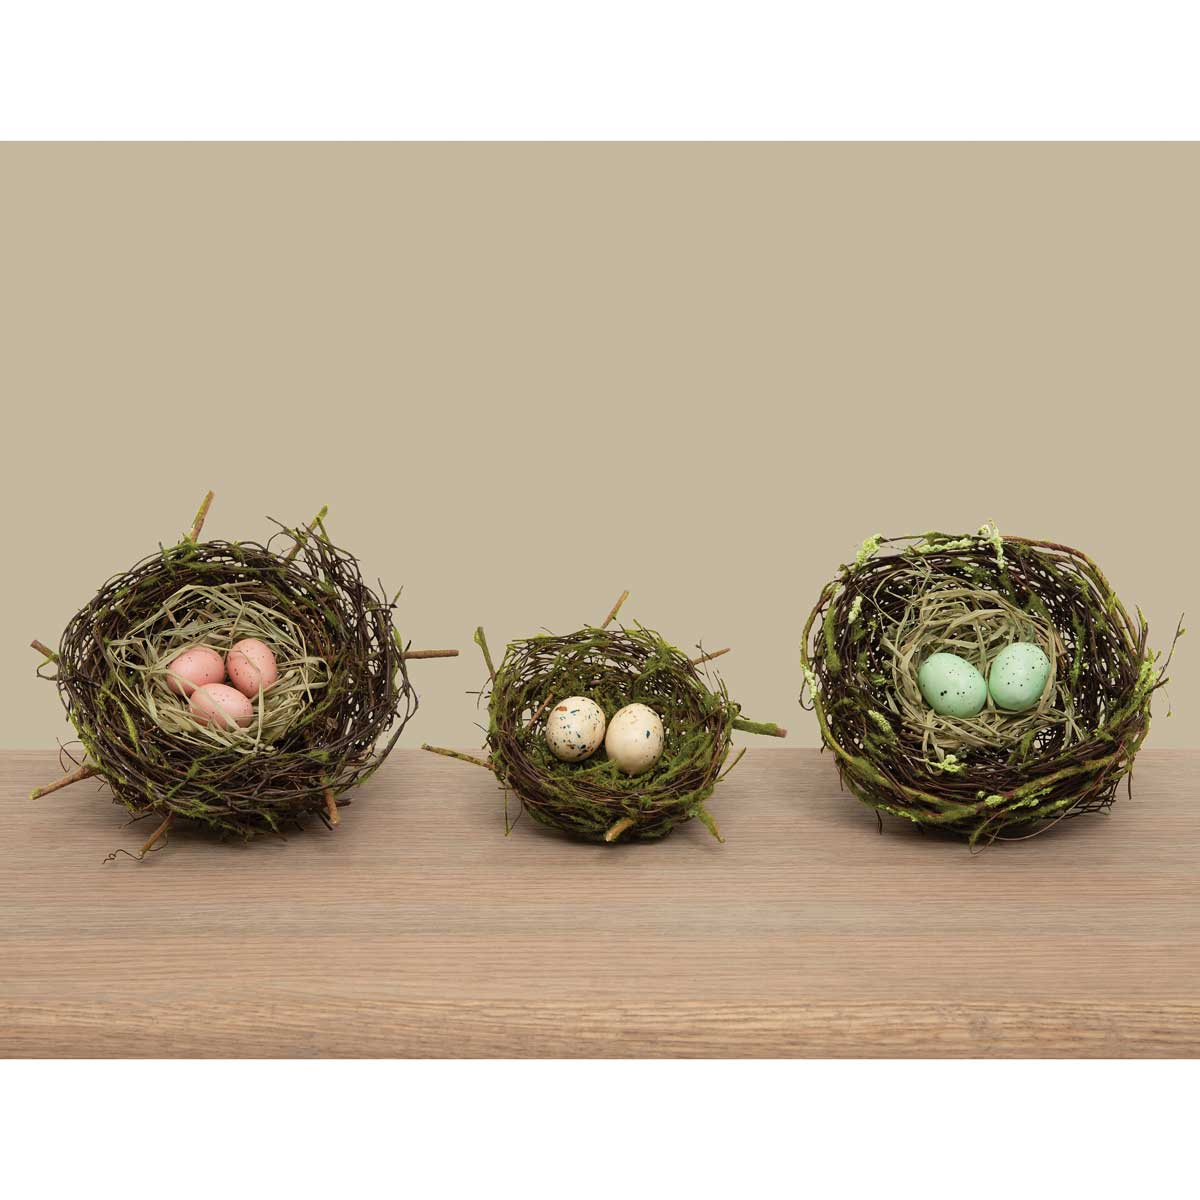 TWIG NEST WITH RAFFIA, MOSS AND PINK EGGS 6"X2.5"